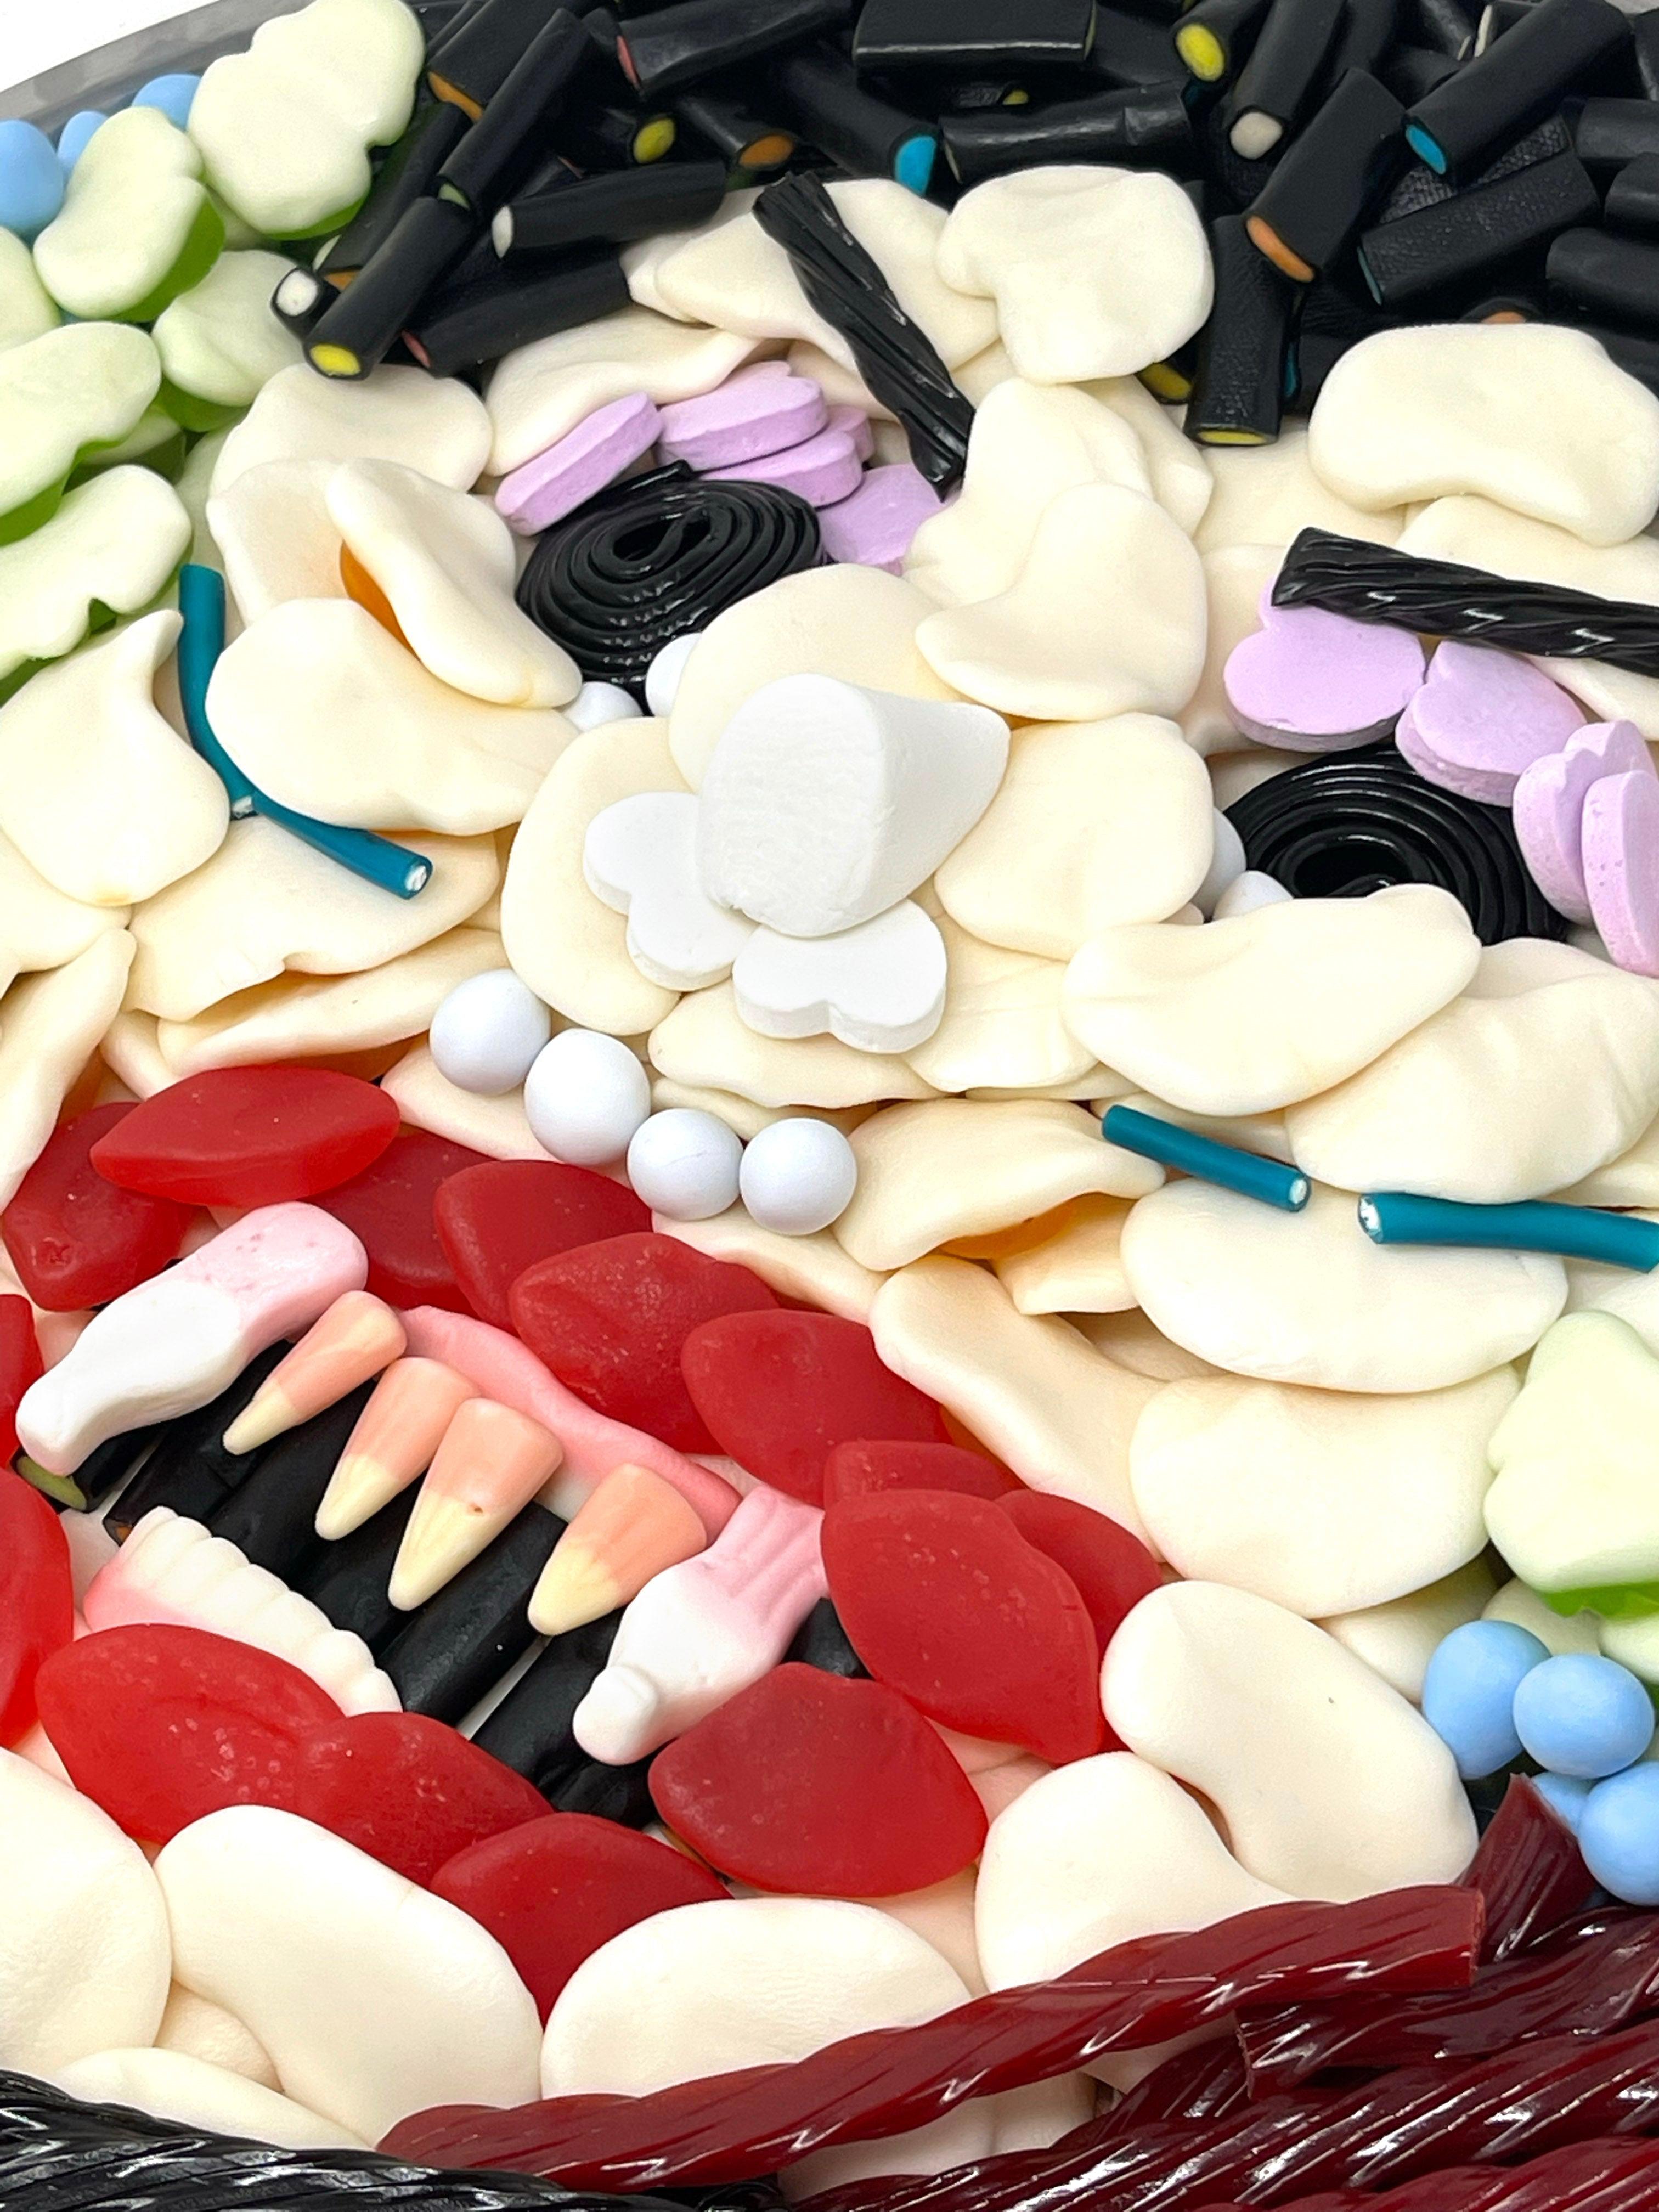 Dracula Candy Tray-Charcuterie-Corporate Catering Toronto-Best Charcuterie-Catering Toronto-Cured Catering